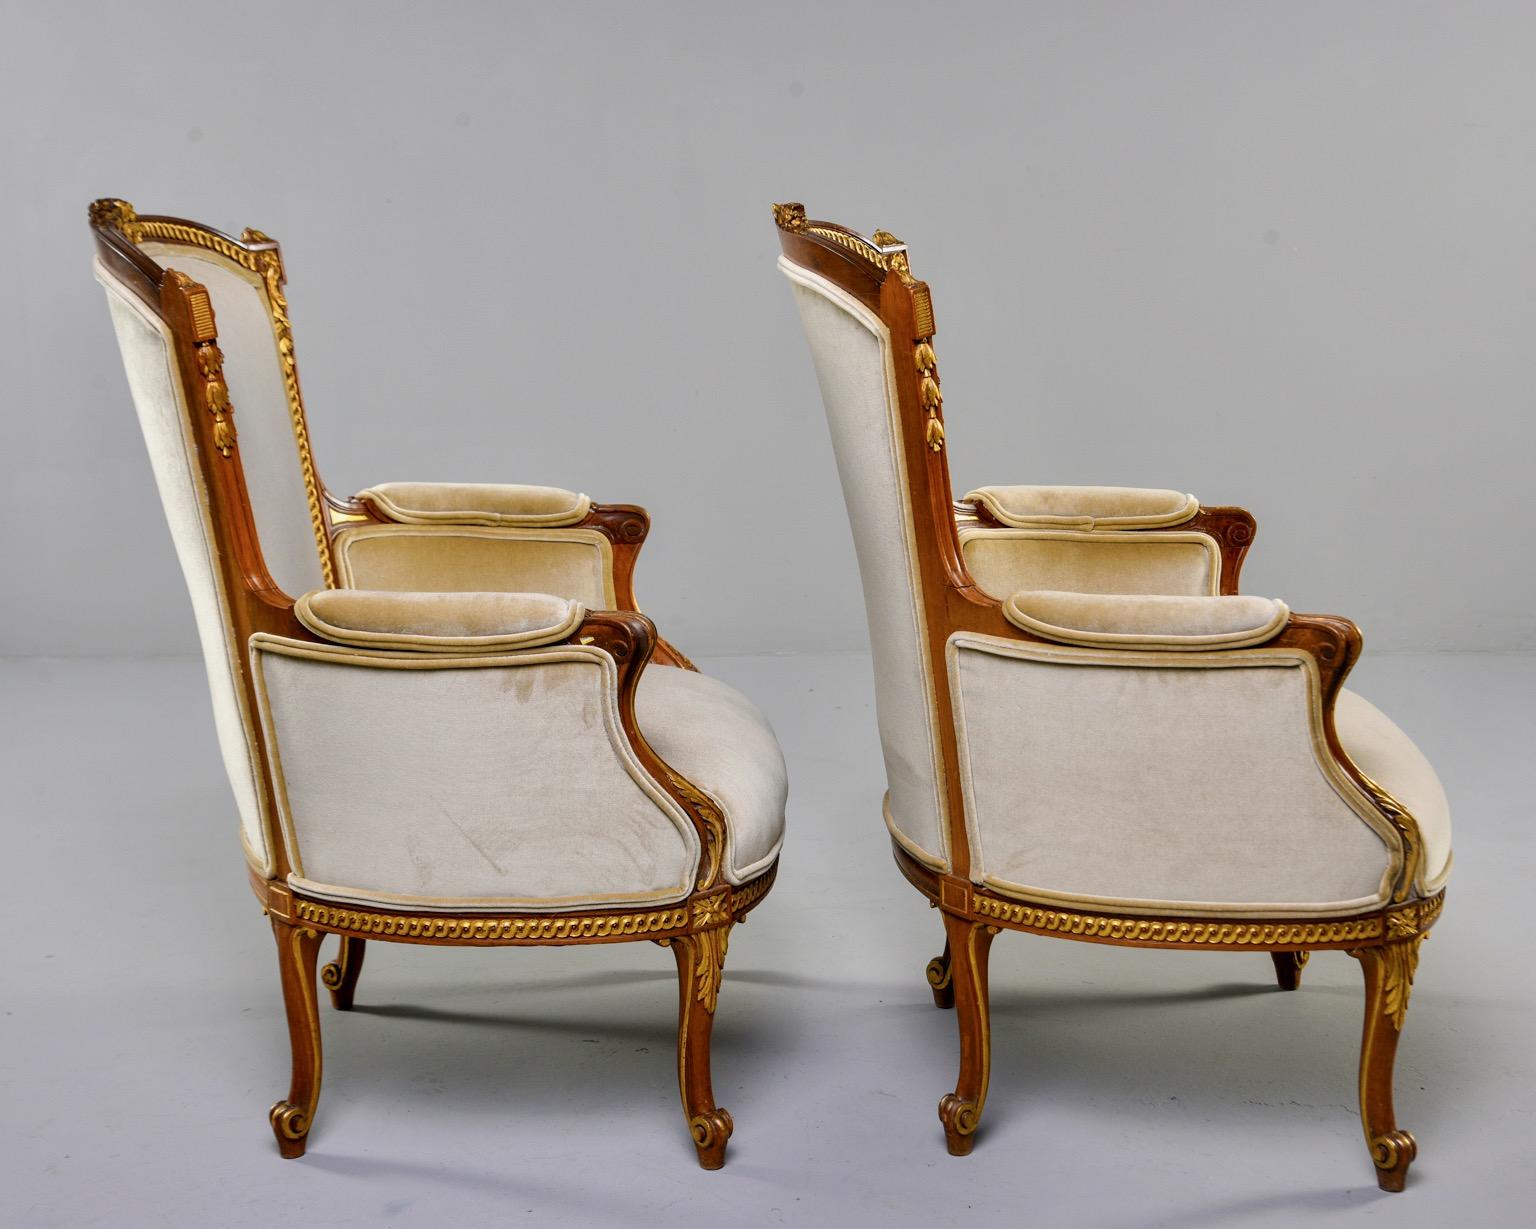 Pair of Louis XV style French armchairs feature beautifully carved and gilded walnut frames, circa 1900. Tall seat backs have carved crests and gilt detail, padded arms and scrolled cabriole legs. Newly upholstered in a golden wheat colored velvet.